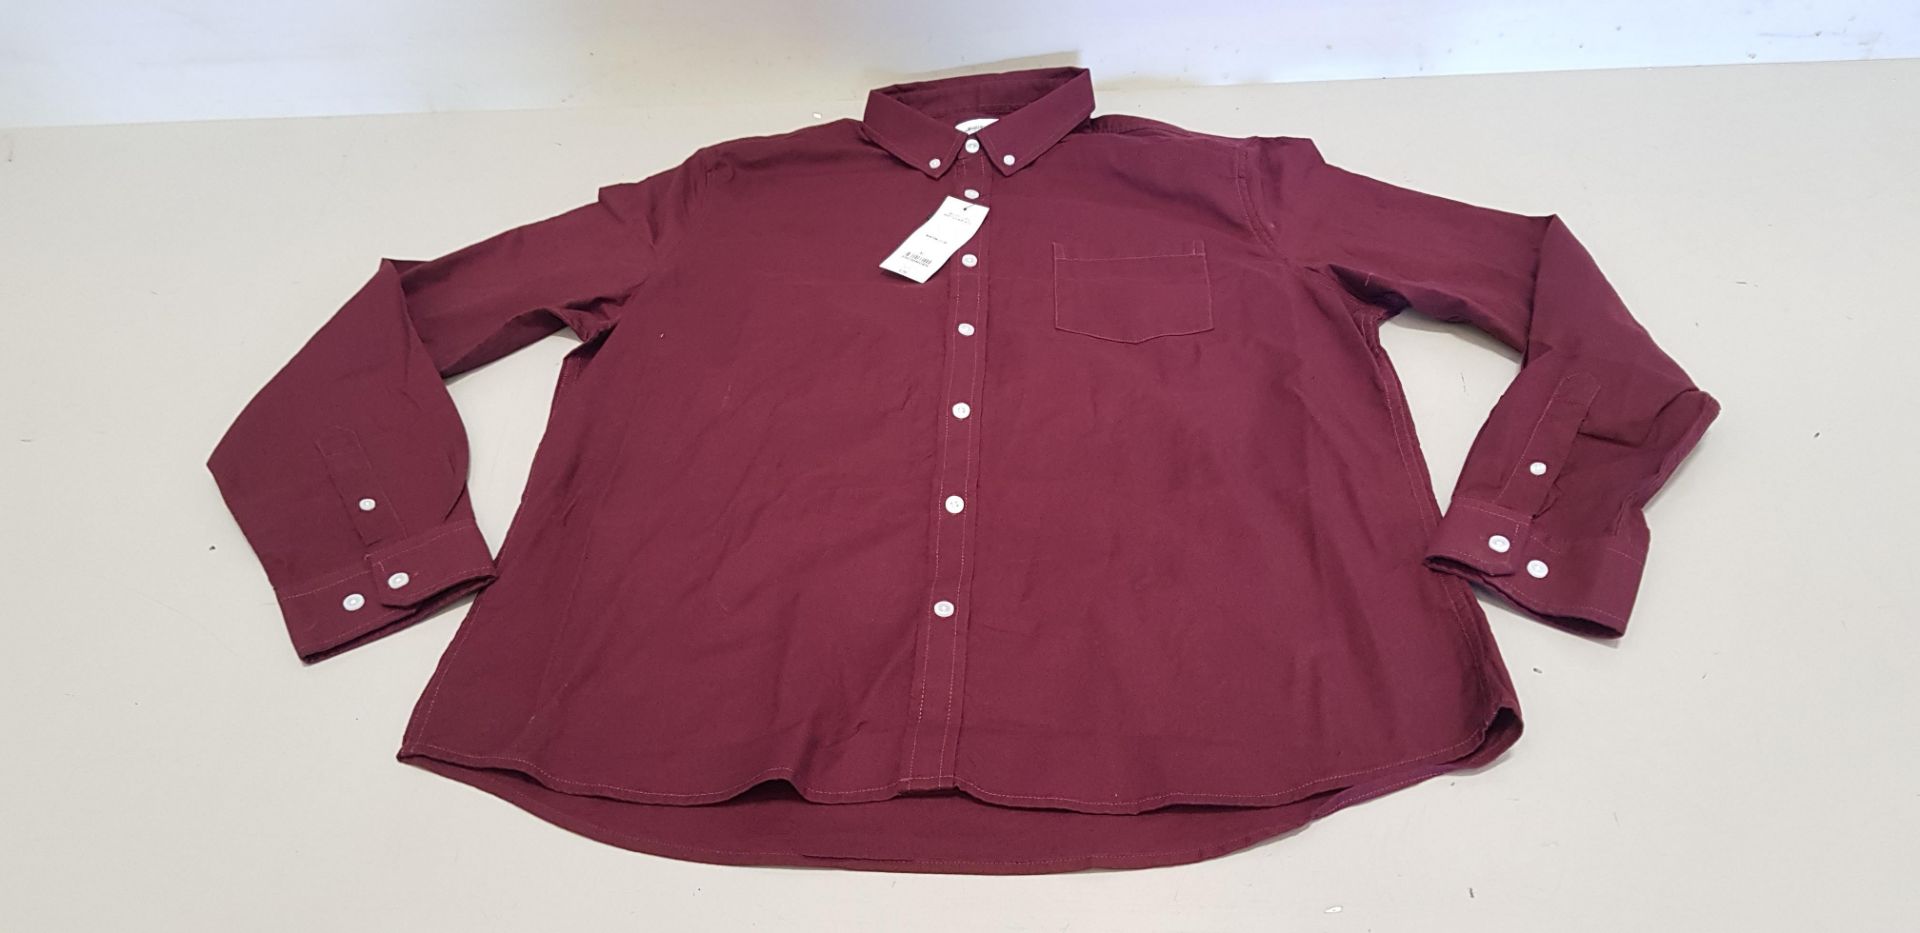 40 X BRAND NEW BURTON MENSWEAR LONGSLEEVED BUTTONED SHIRTS IN SIZE LARGE AND XLARGE